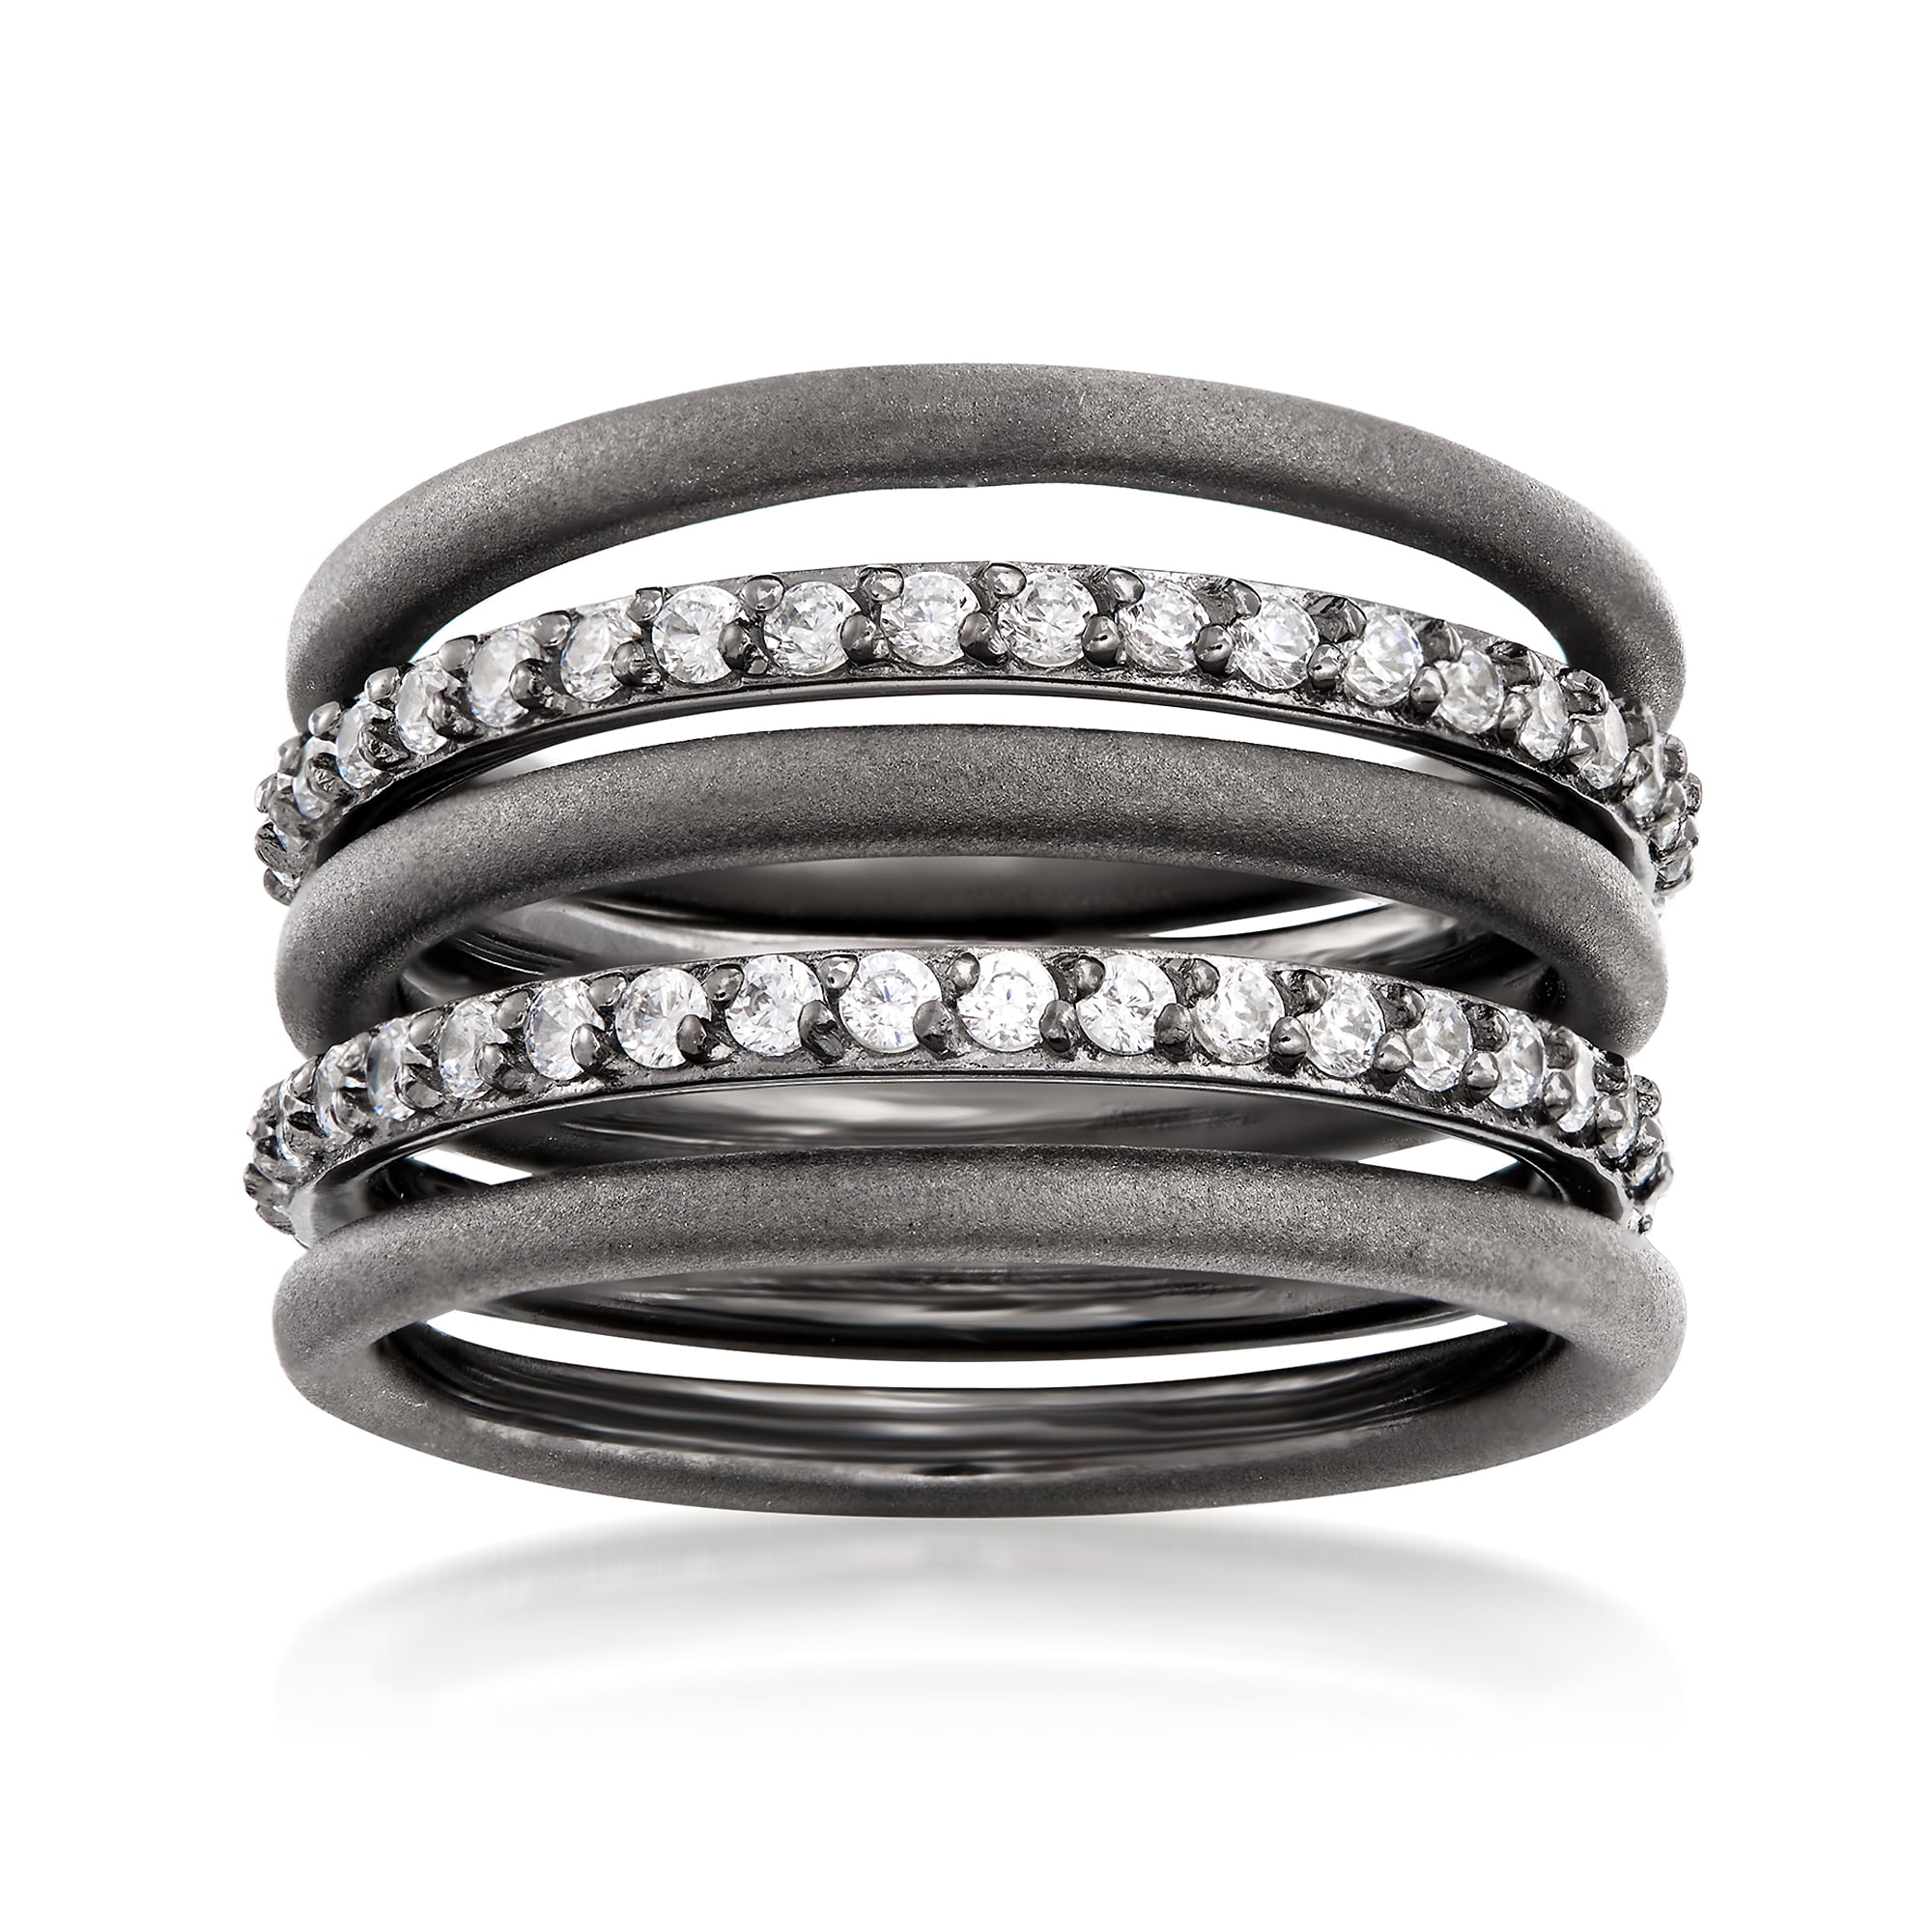 Ross-Simons - Ross-Simons Sterling Silver Jewelry Set: 5 Stackable ...